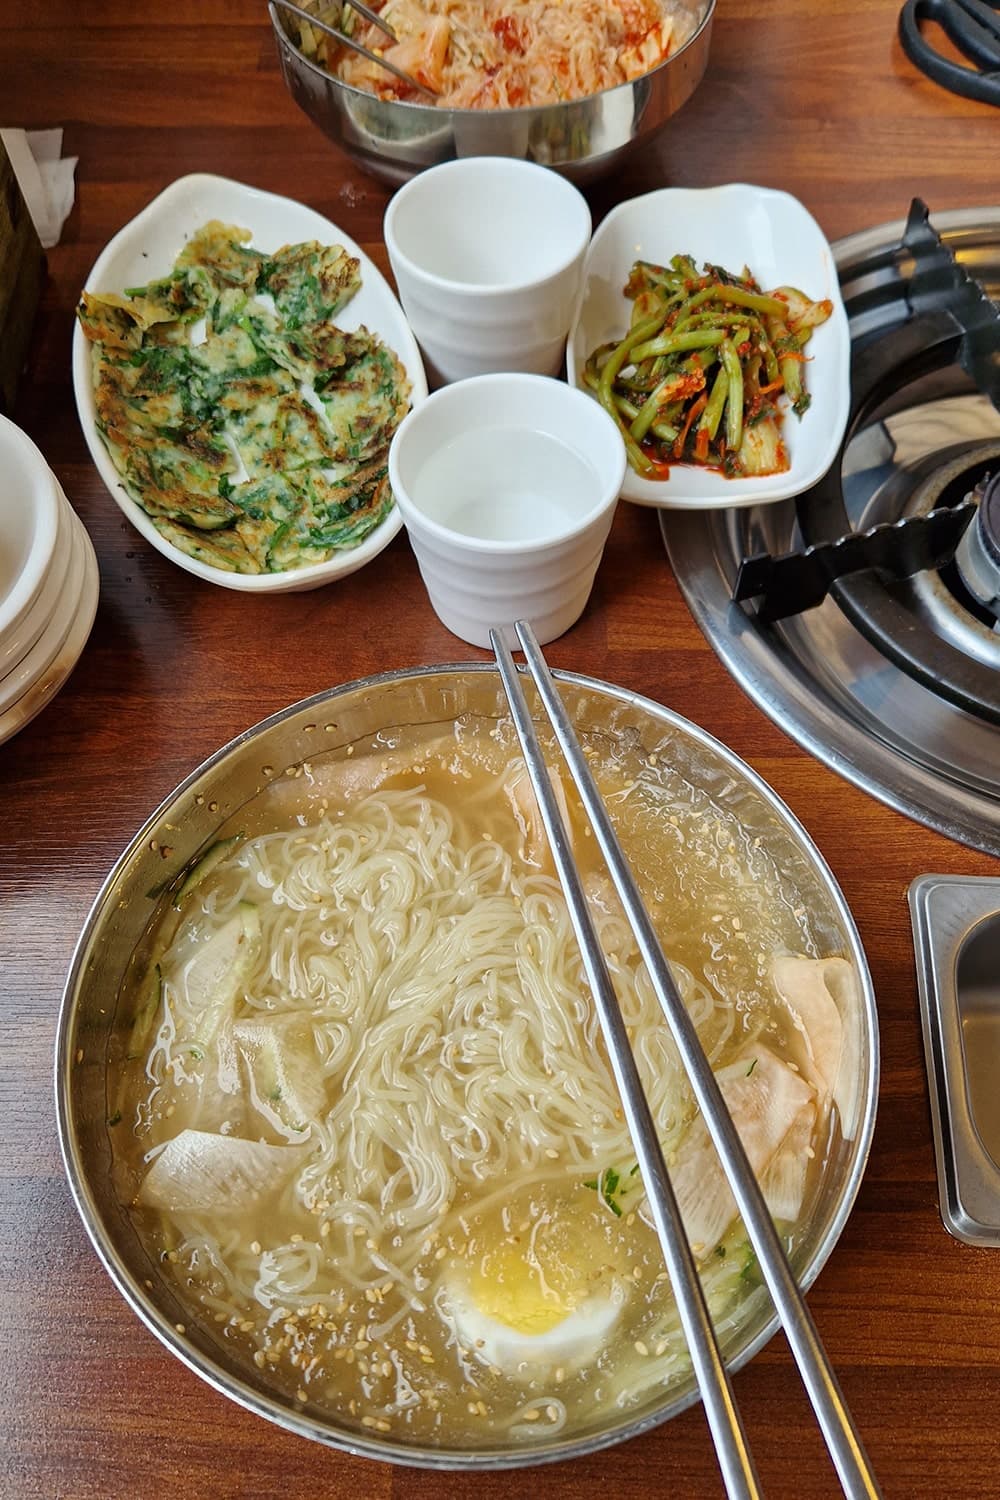 mul-naengmyeon dish and banchan seen from above